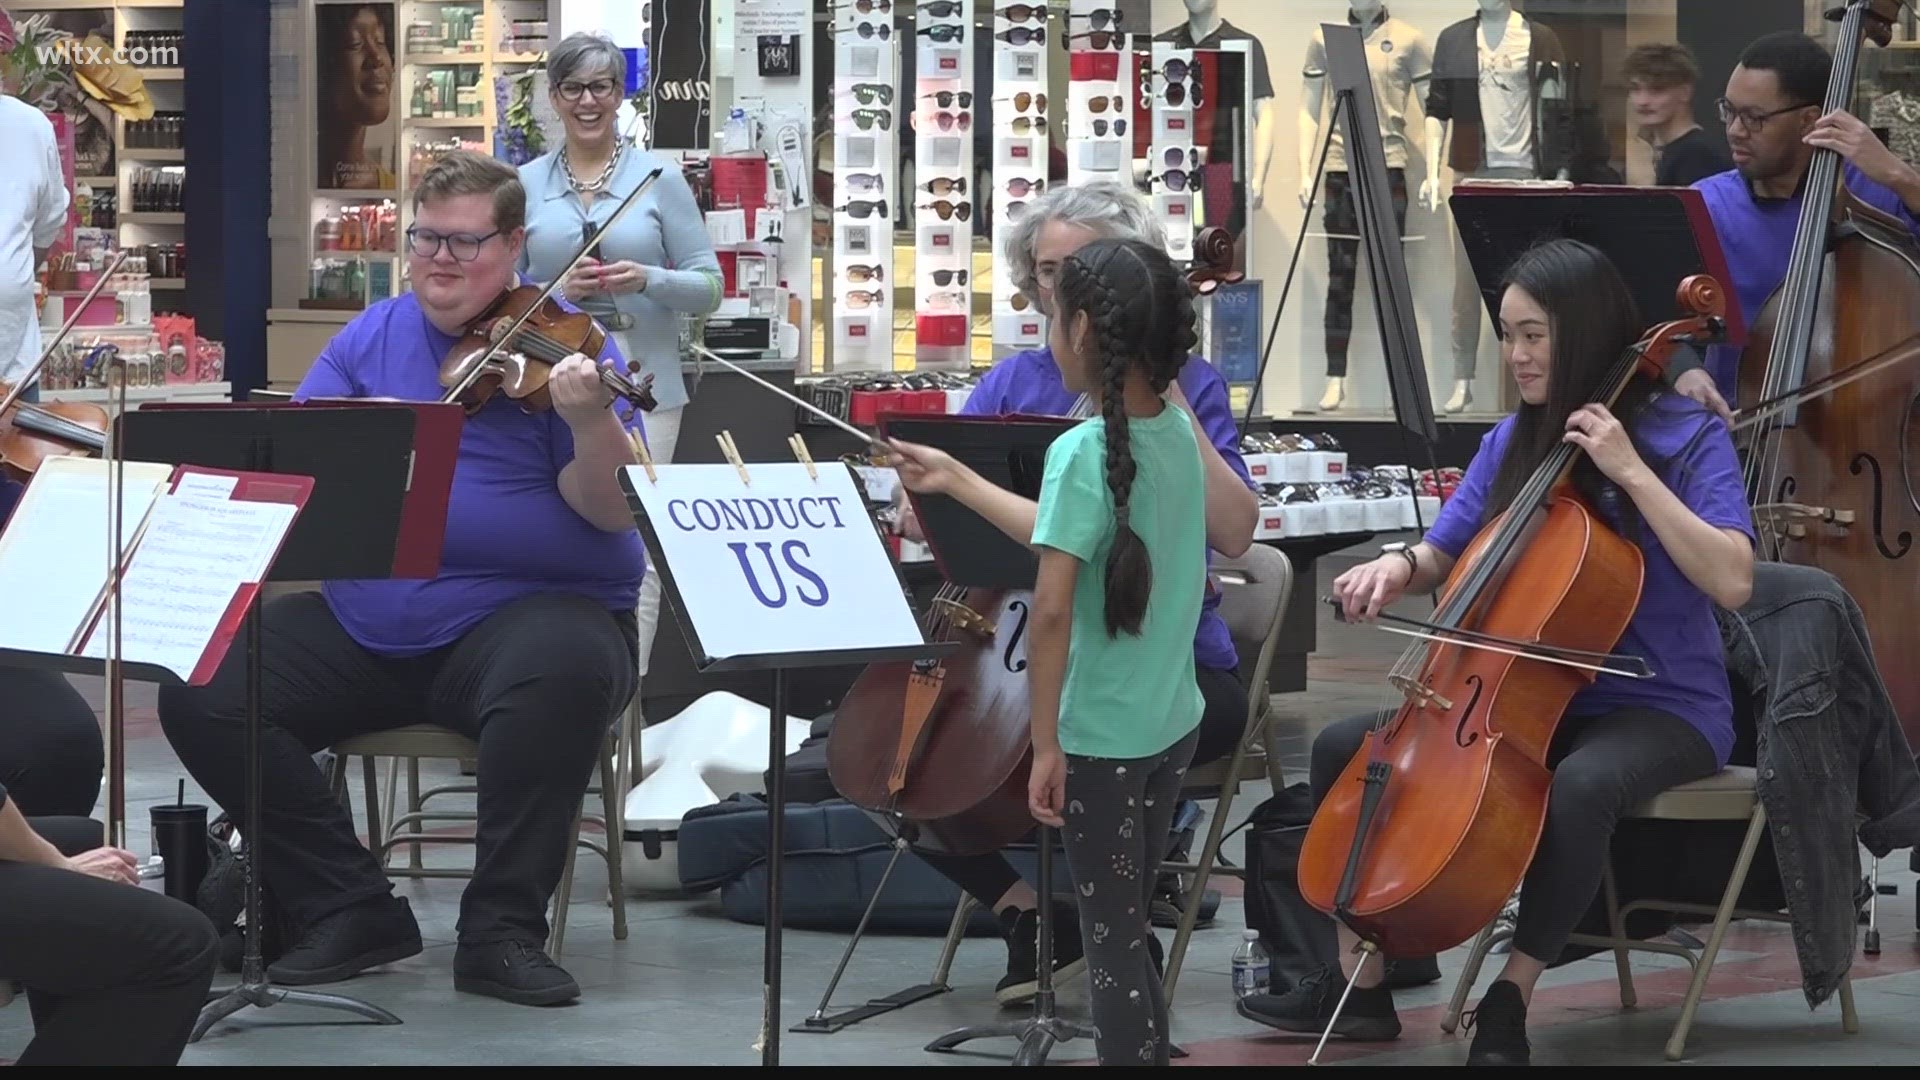 Musicians from South Carolina Philharmonic Orchestra perform in small community spaces to introduce classical music to the masses